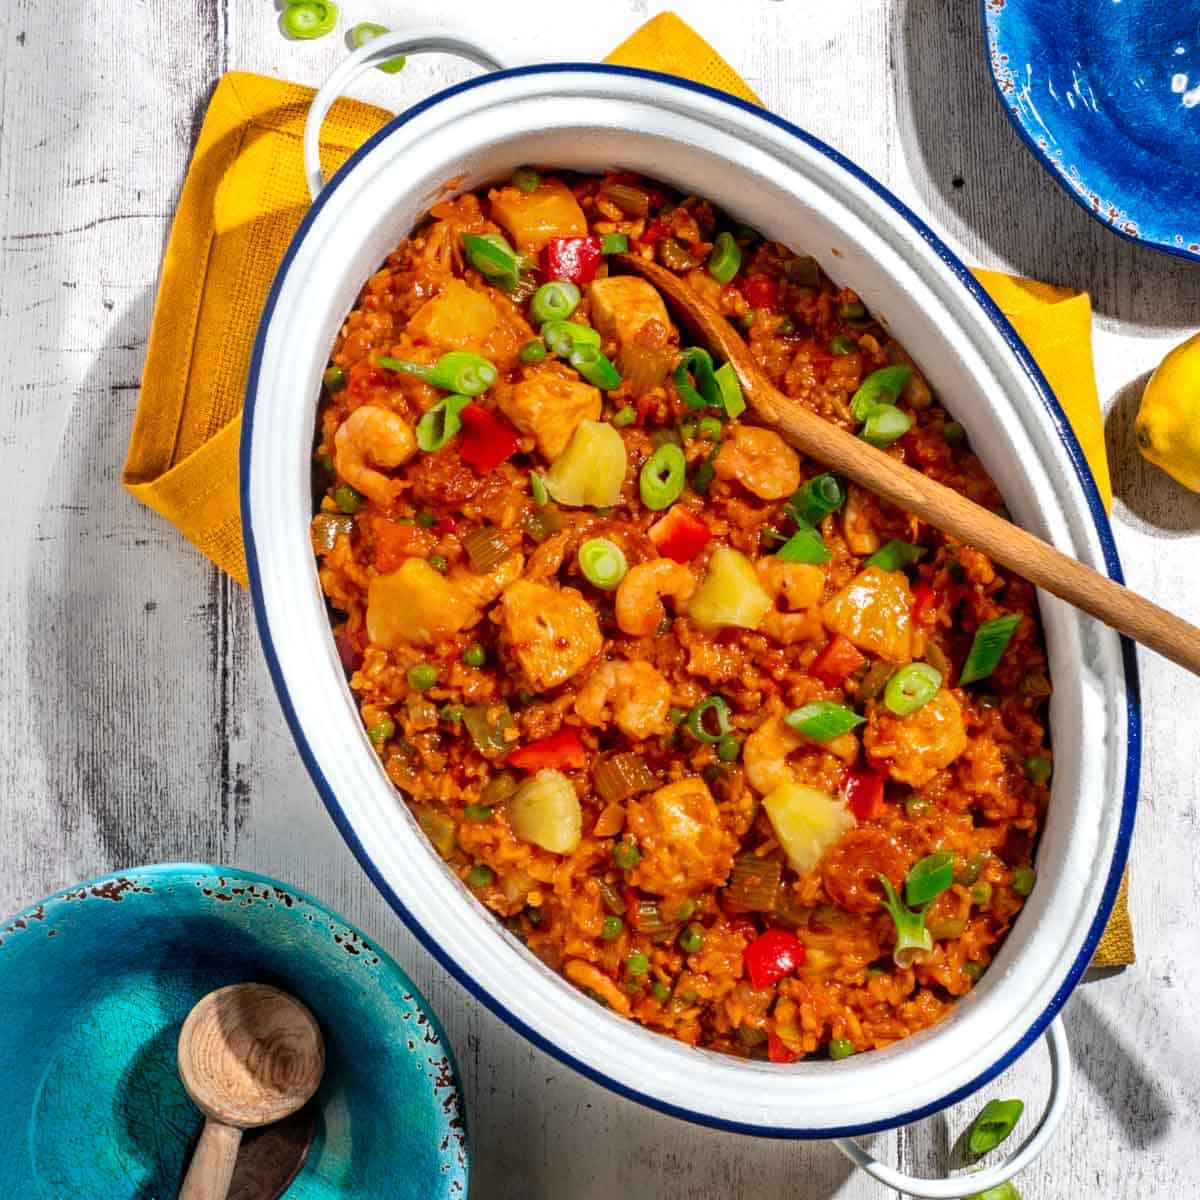 Chicken and chorizo jambalaya in a large, white oval pot surrounded by colourful bowls.